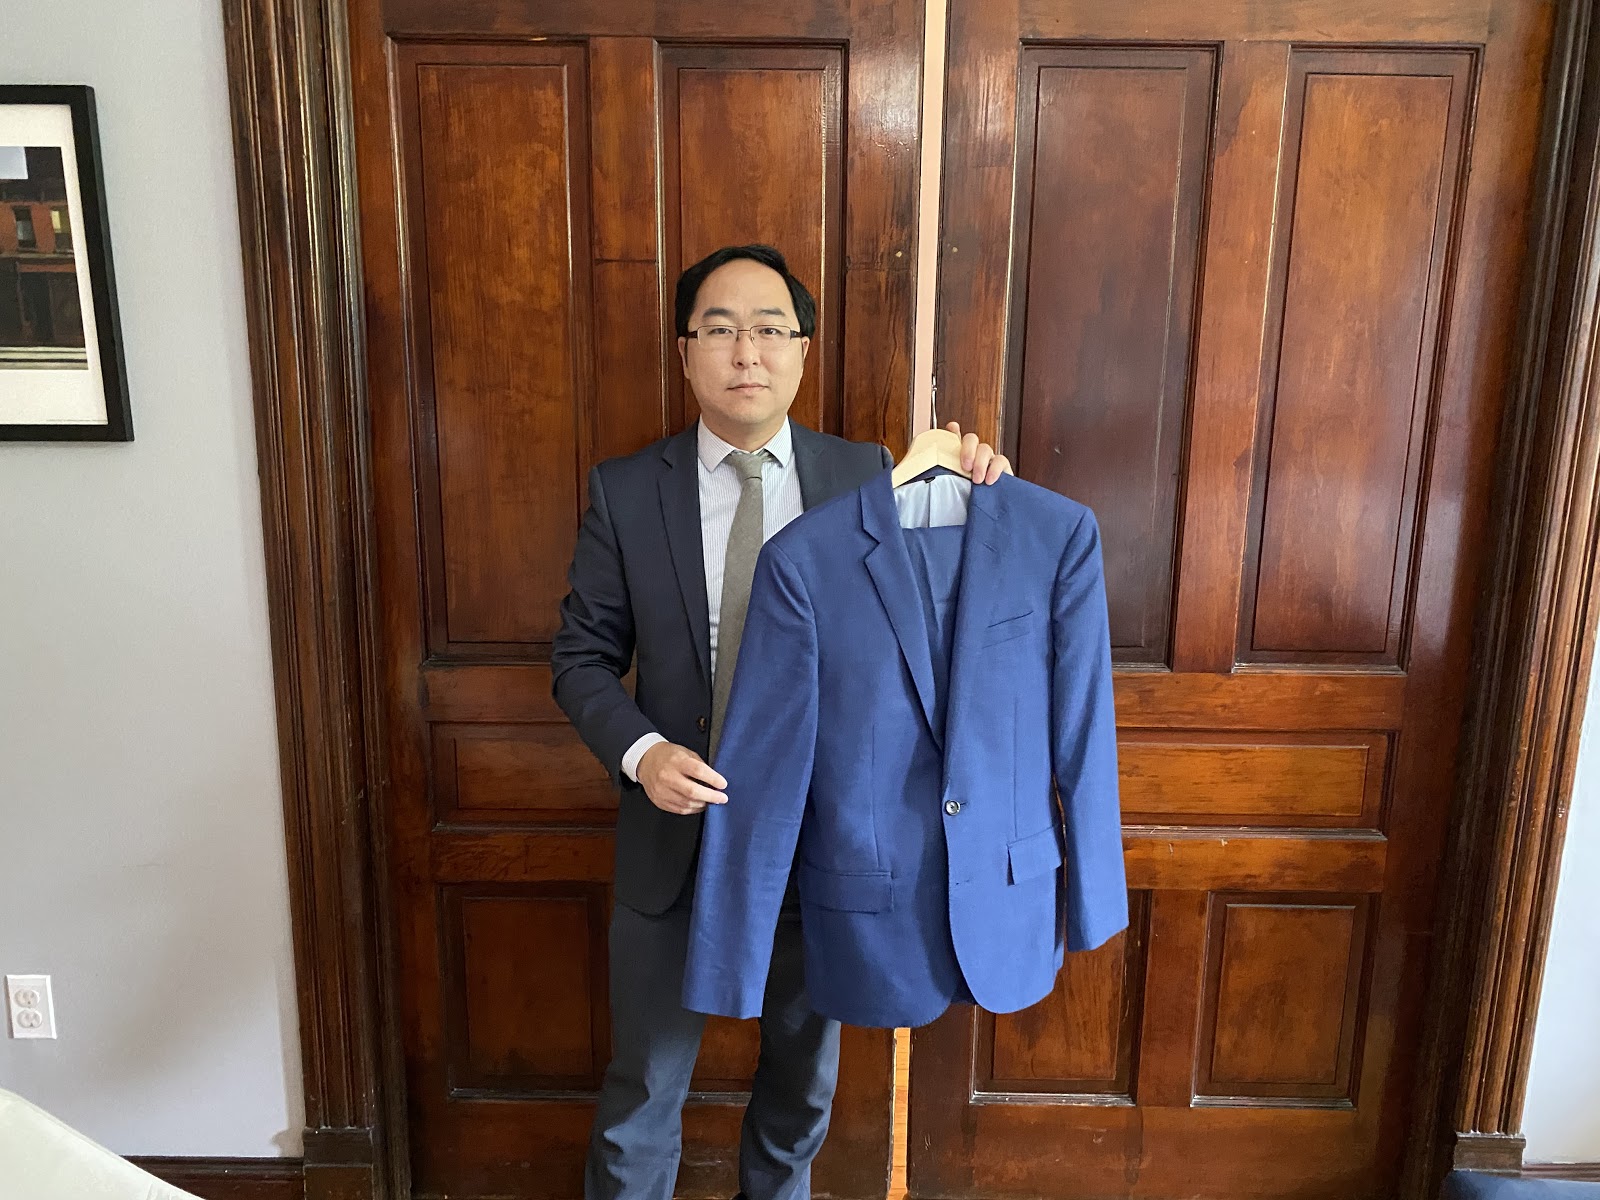 New Jersey Congressman Andy Kim Donating Suit He Wore During Capitol Riot To The Smithsonian